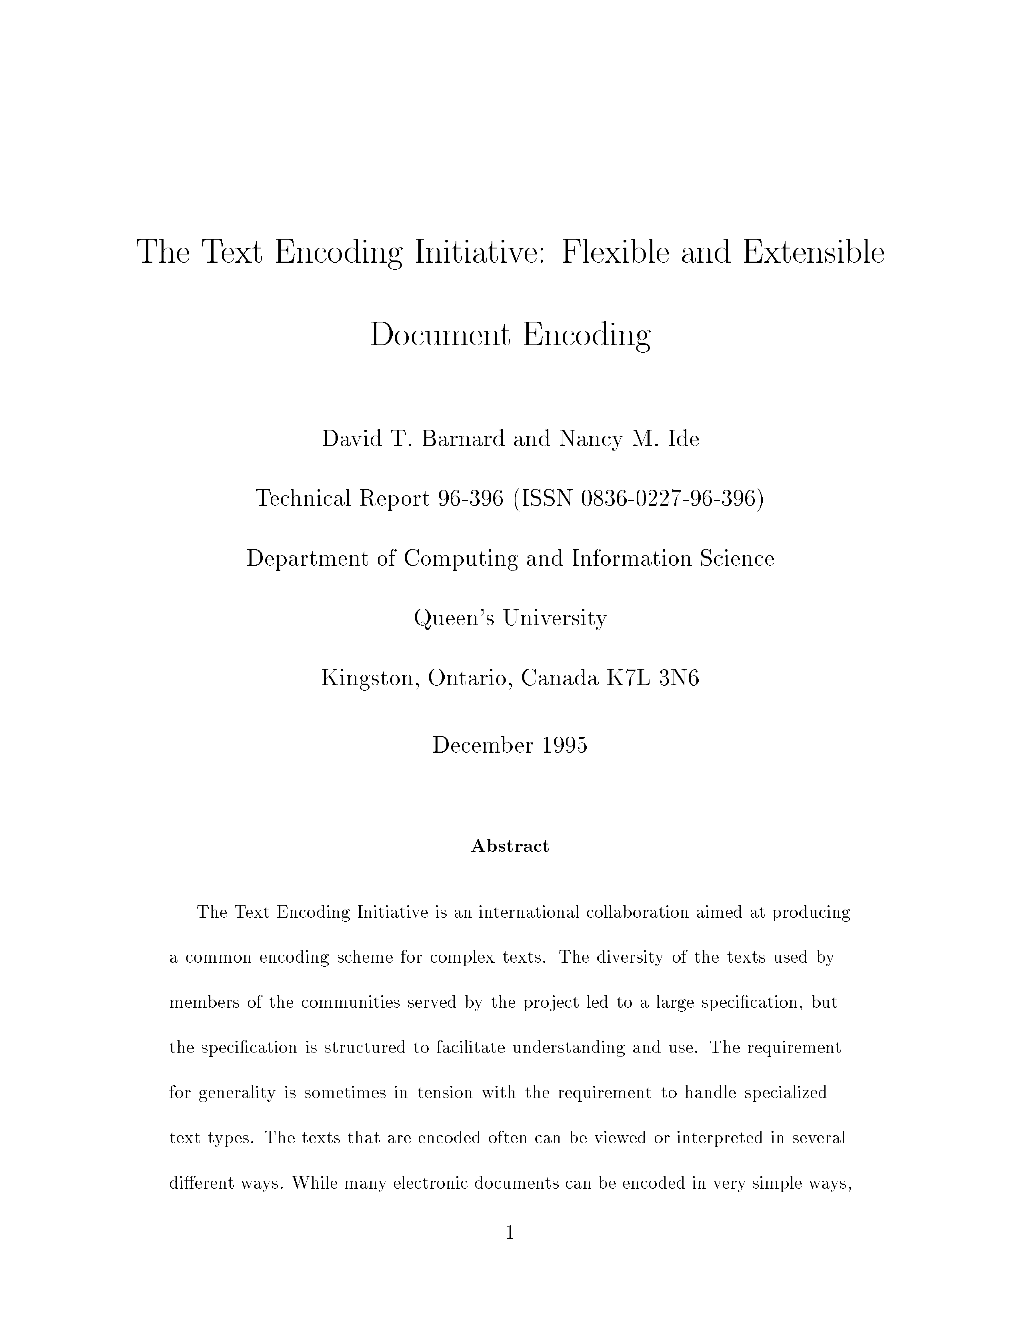 The Text Encoding Initiative: Flexible and Extensible Document Encoding